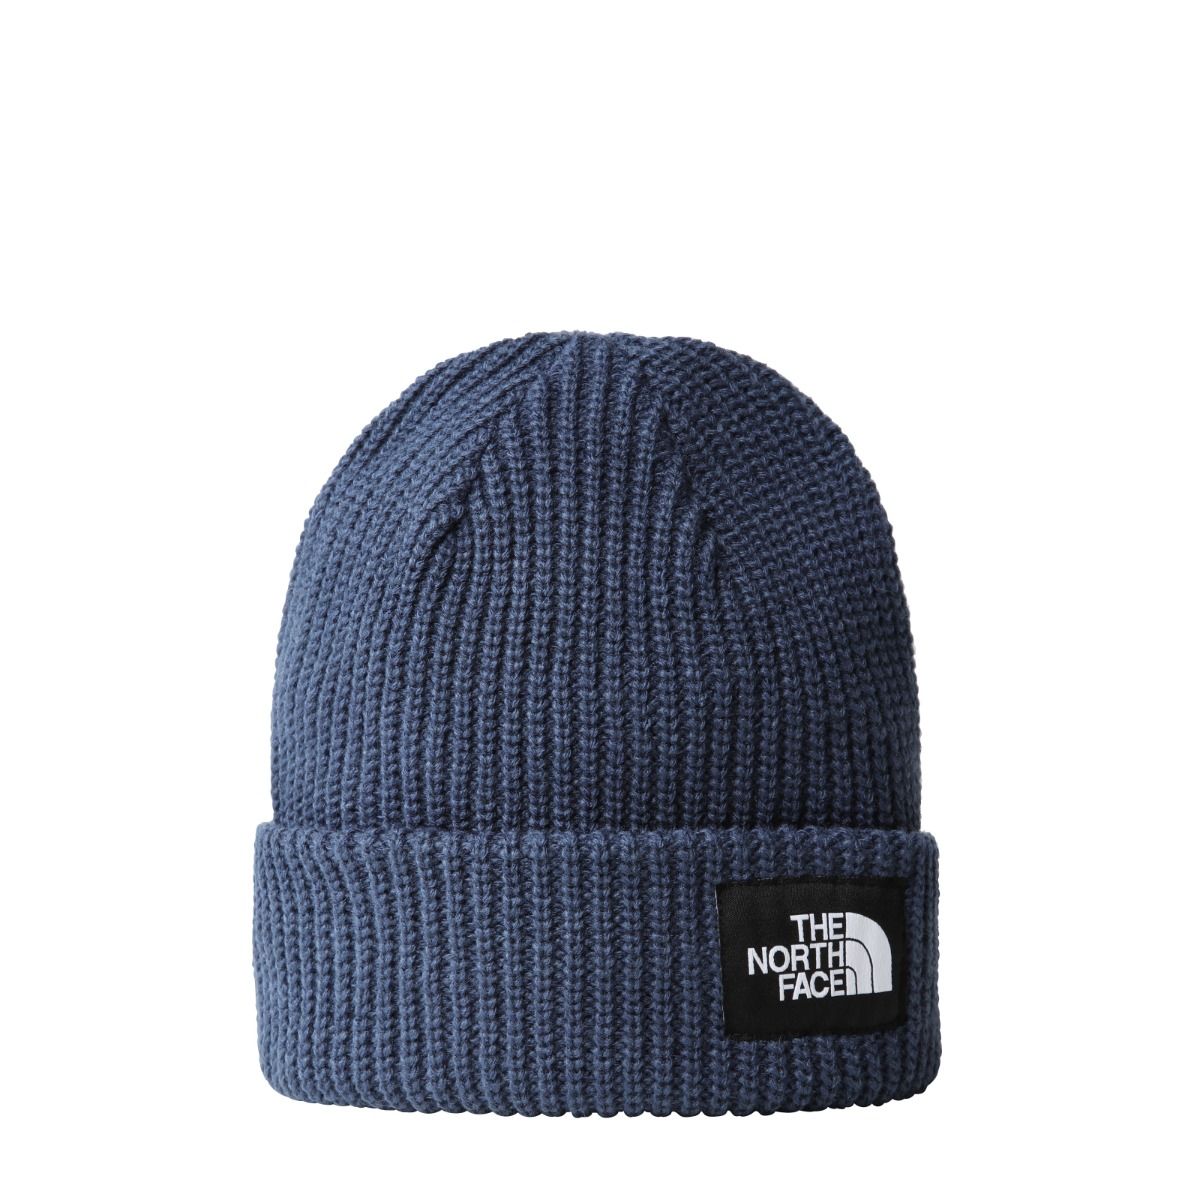 The North Face - SALTY DOG BEANIE